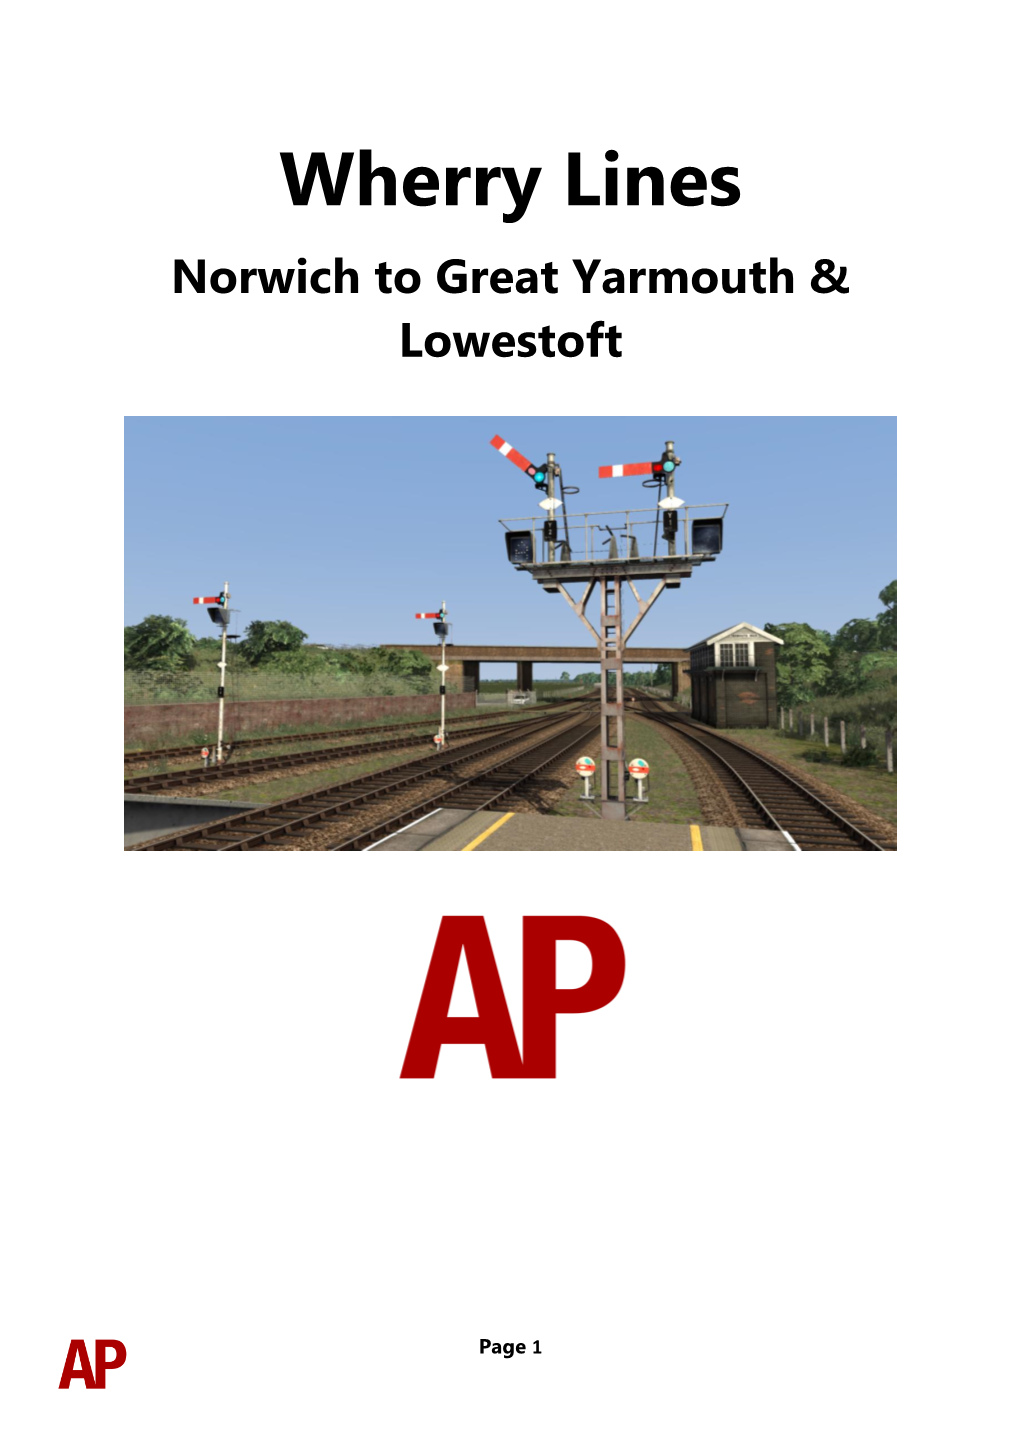 Wherry Lines Norwich to Great Yarmouth & Lowestoft